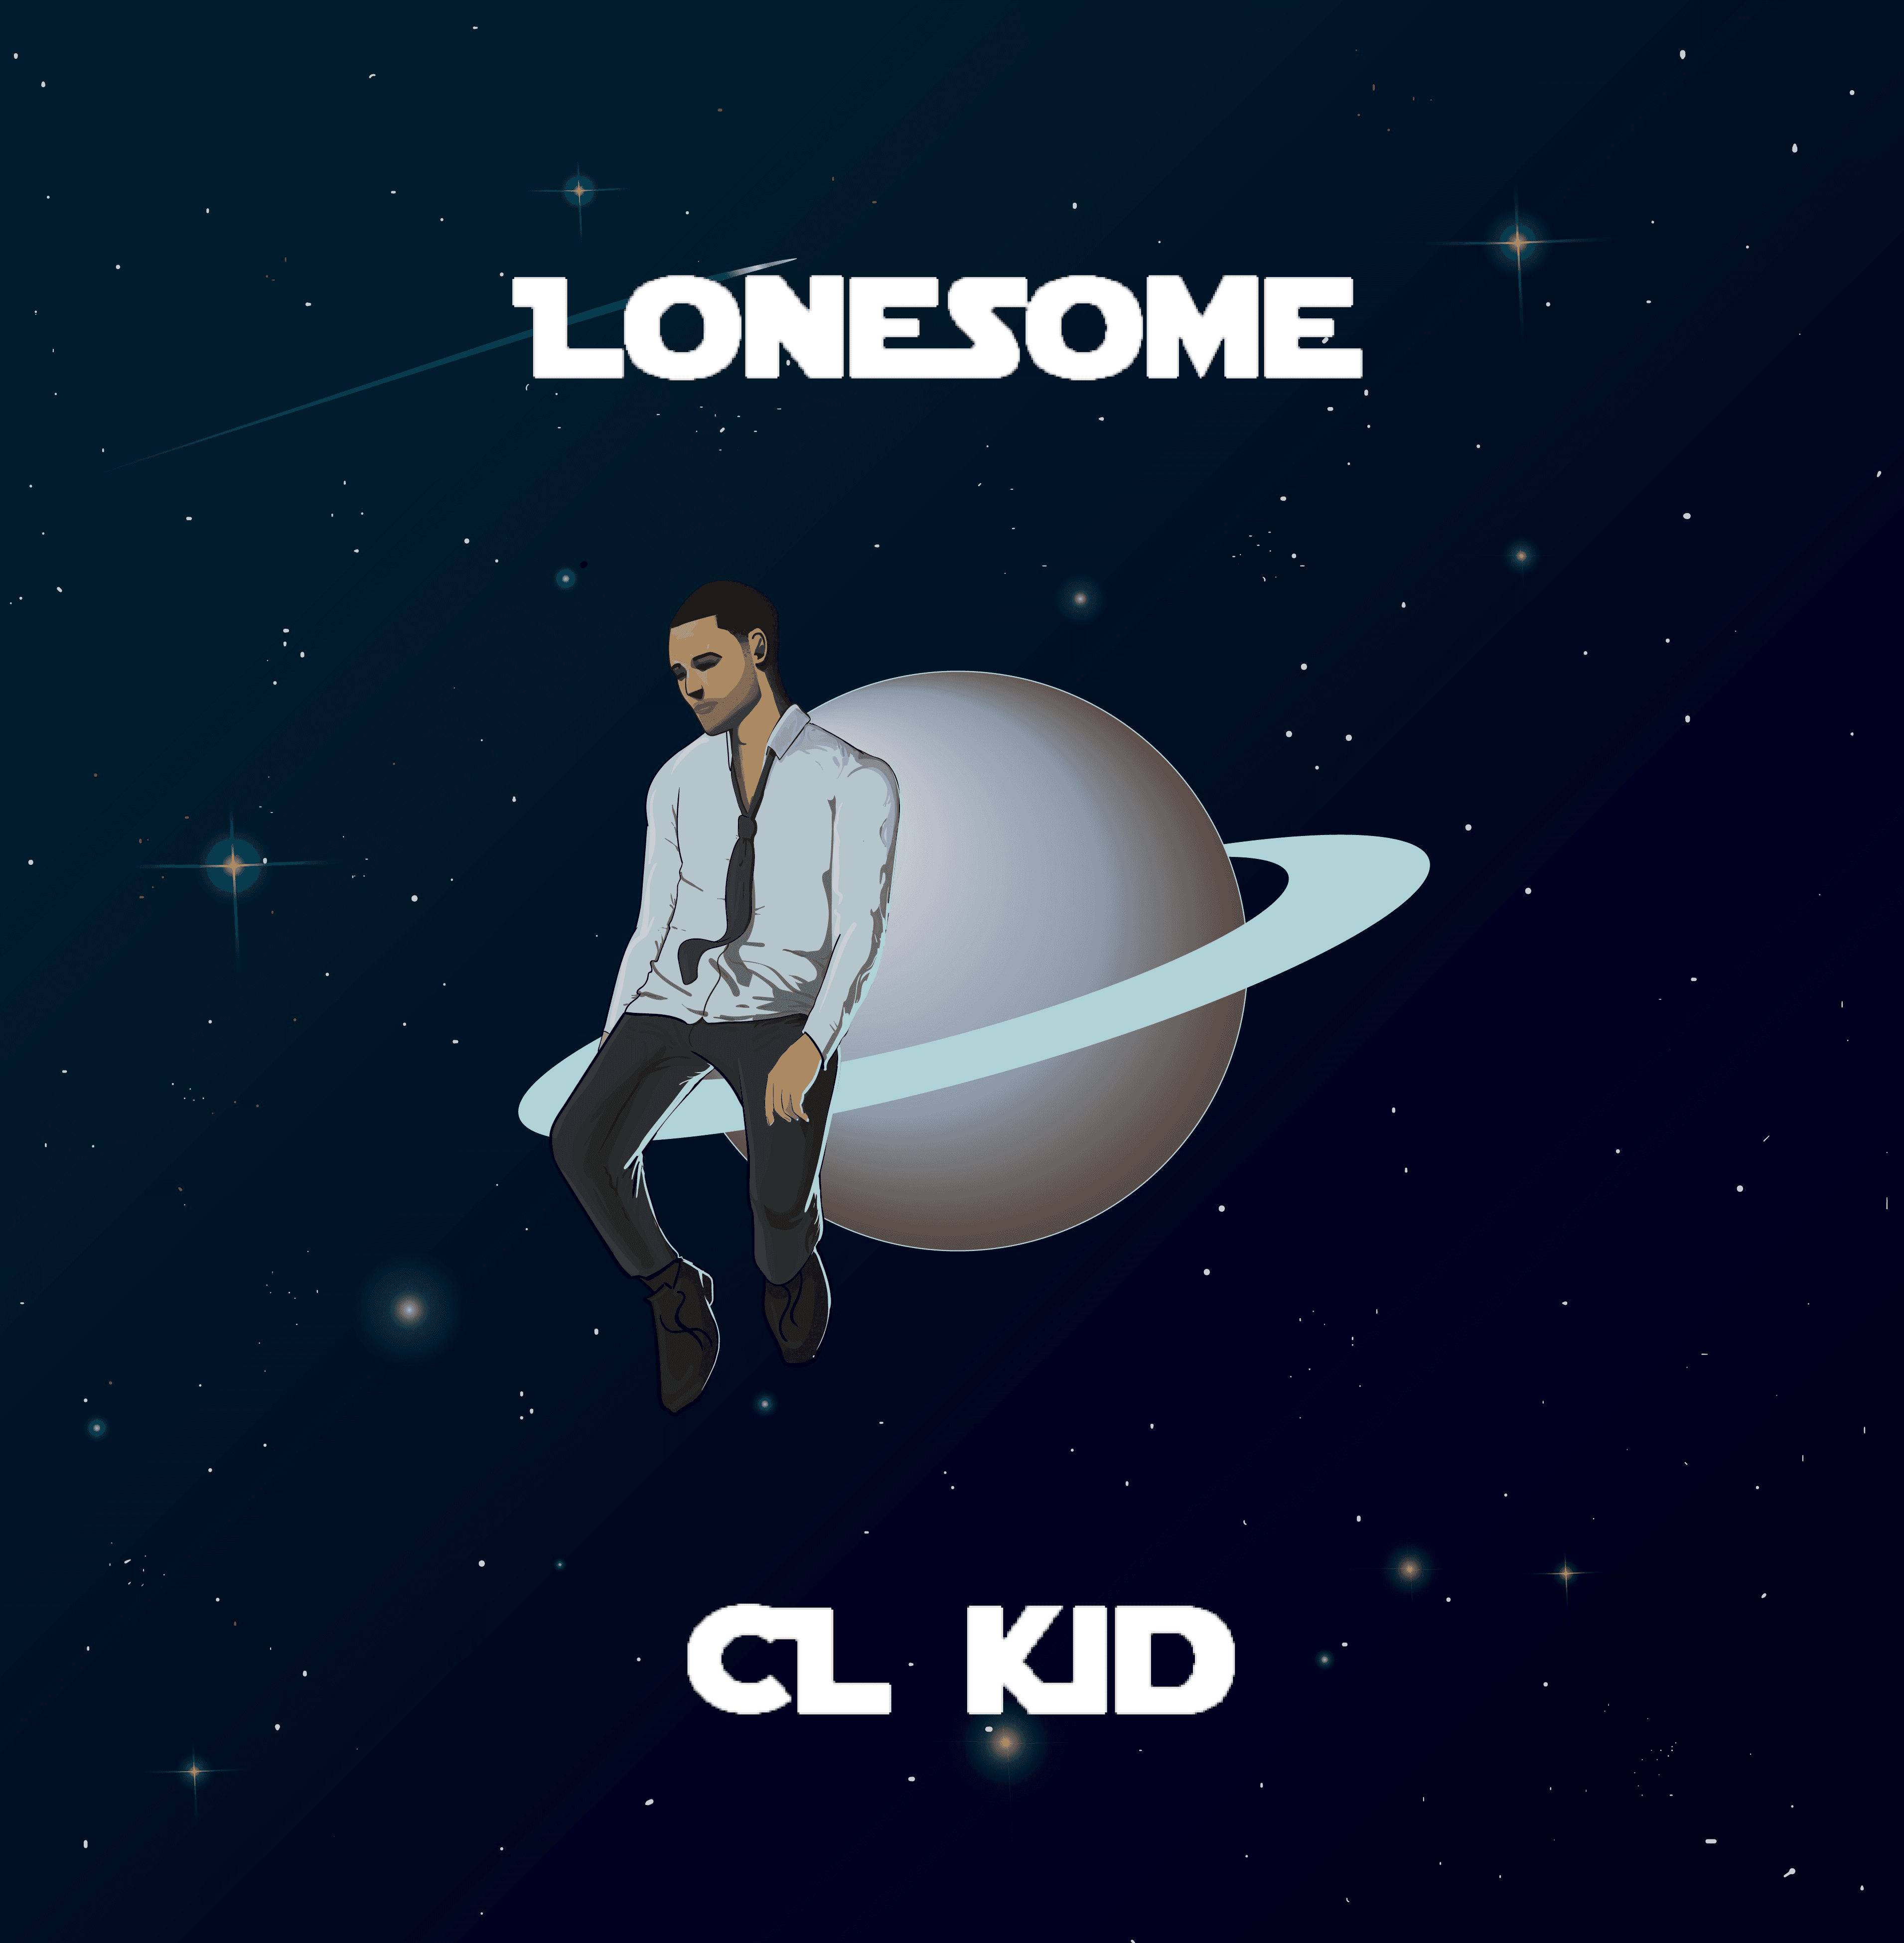 Lonesome - CL KID